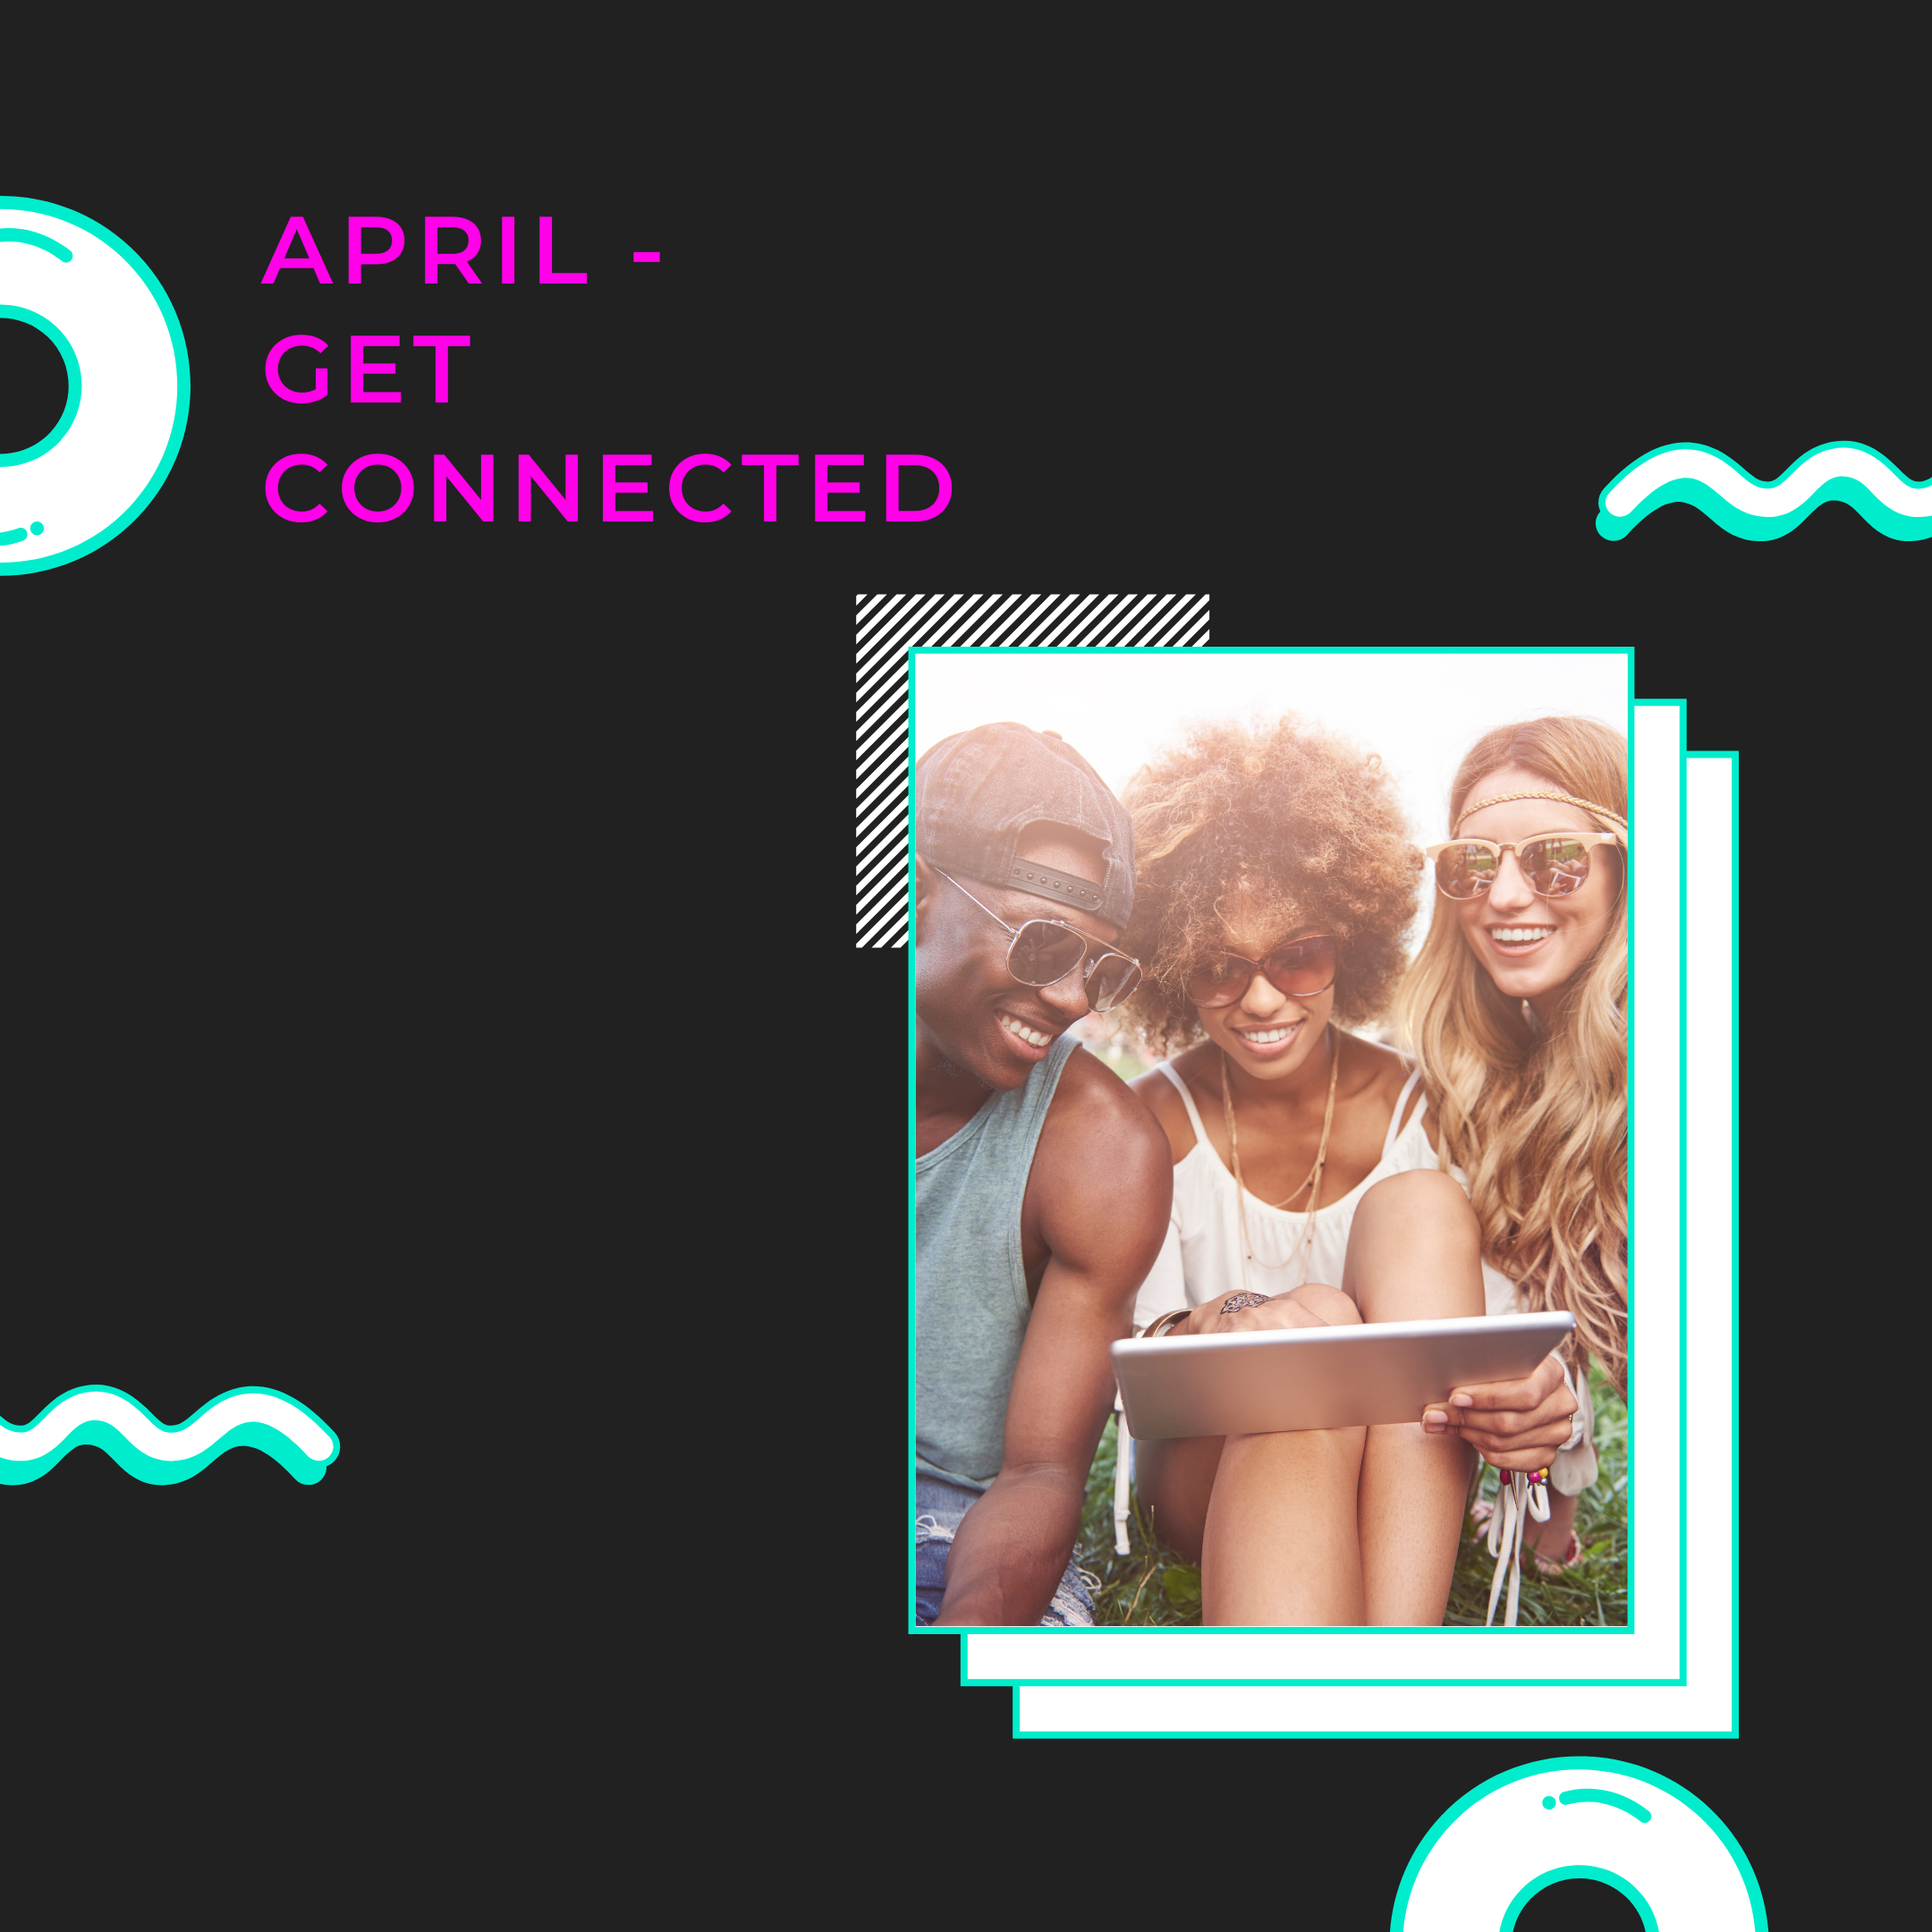 Get connected in April